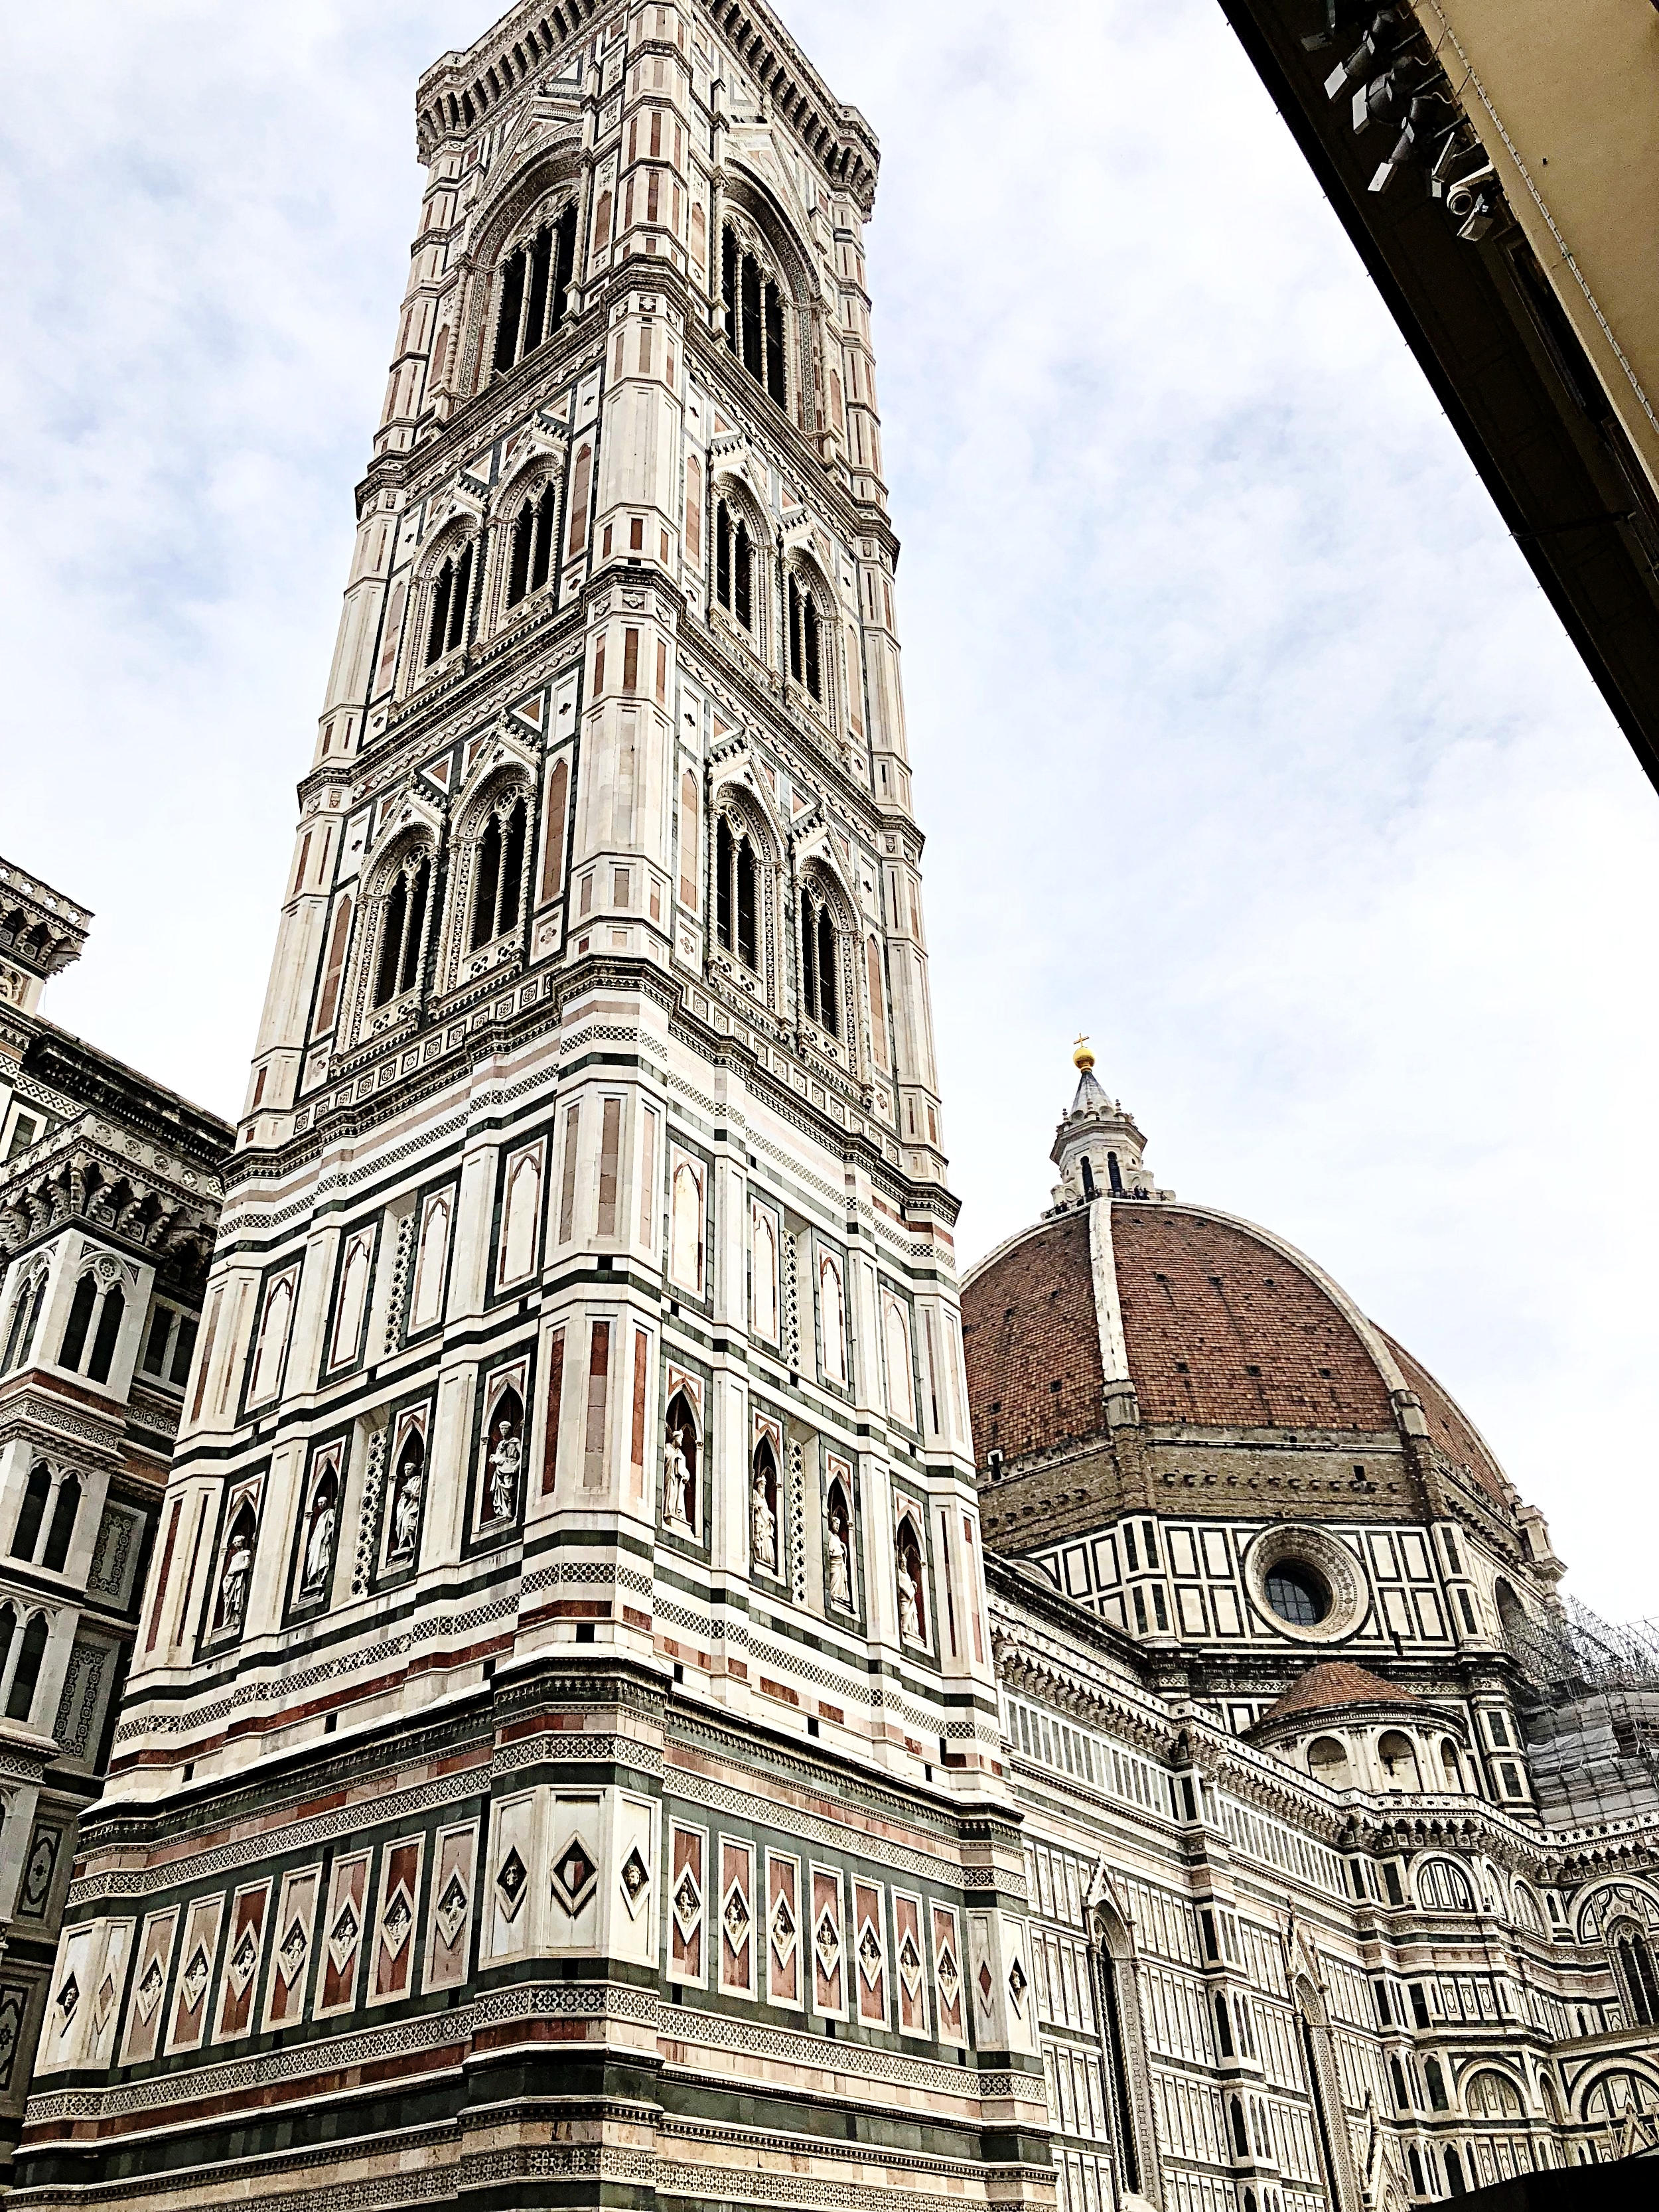  The Bell Tower at the Cathedral di Santa Maria del Fiore.  